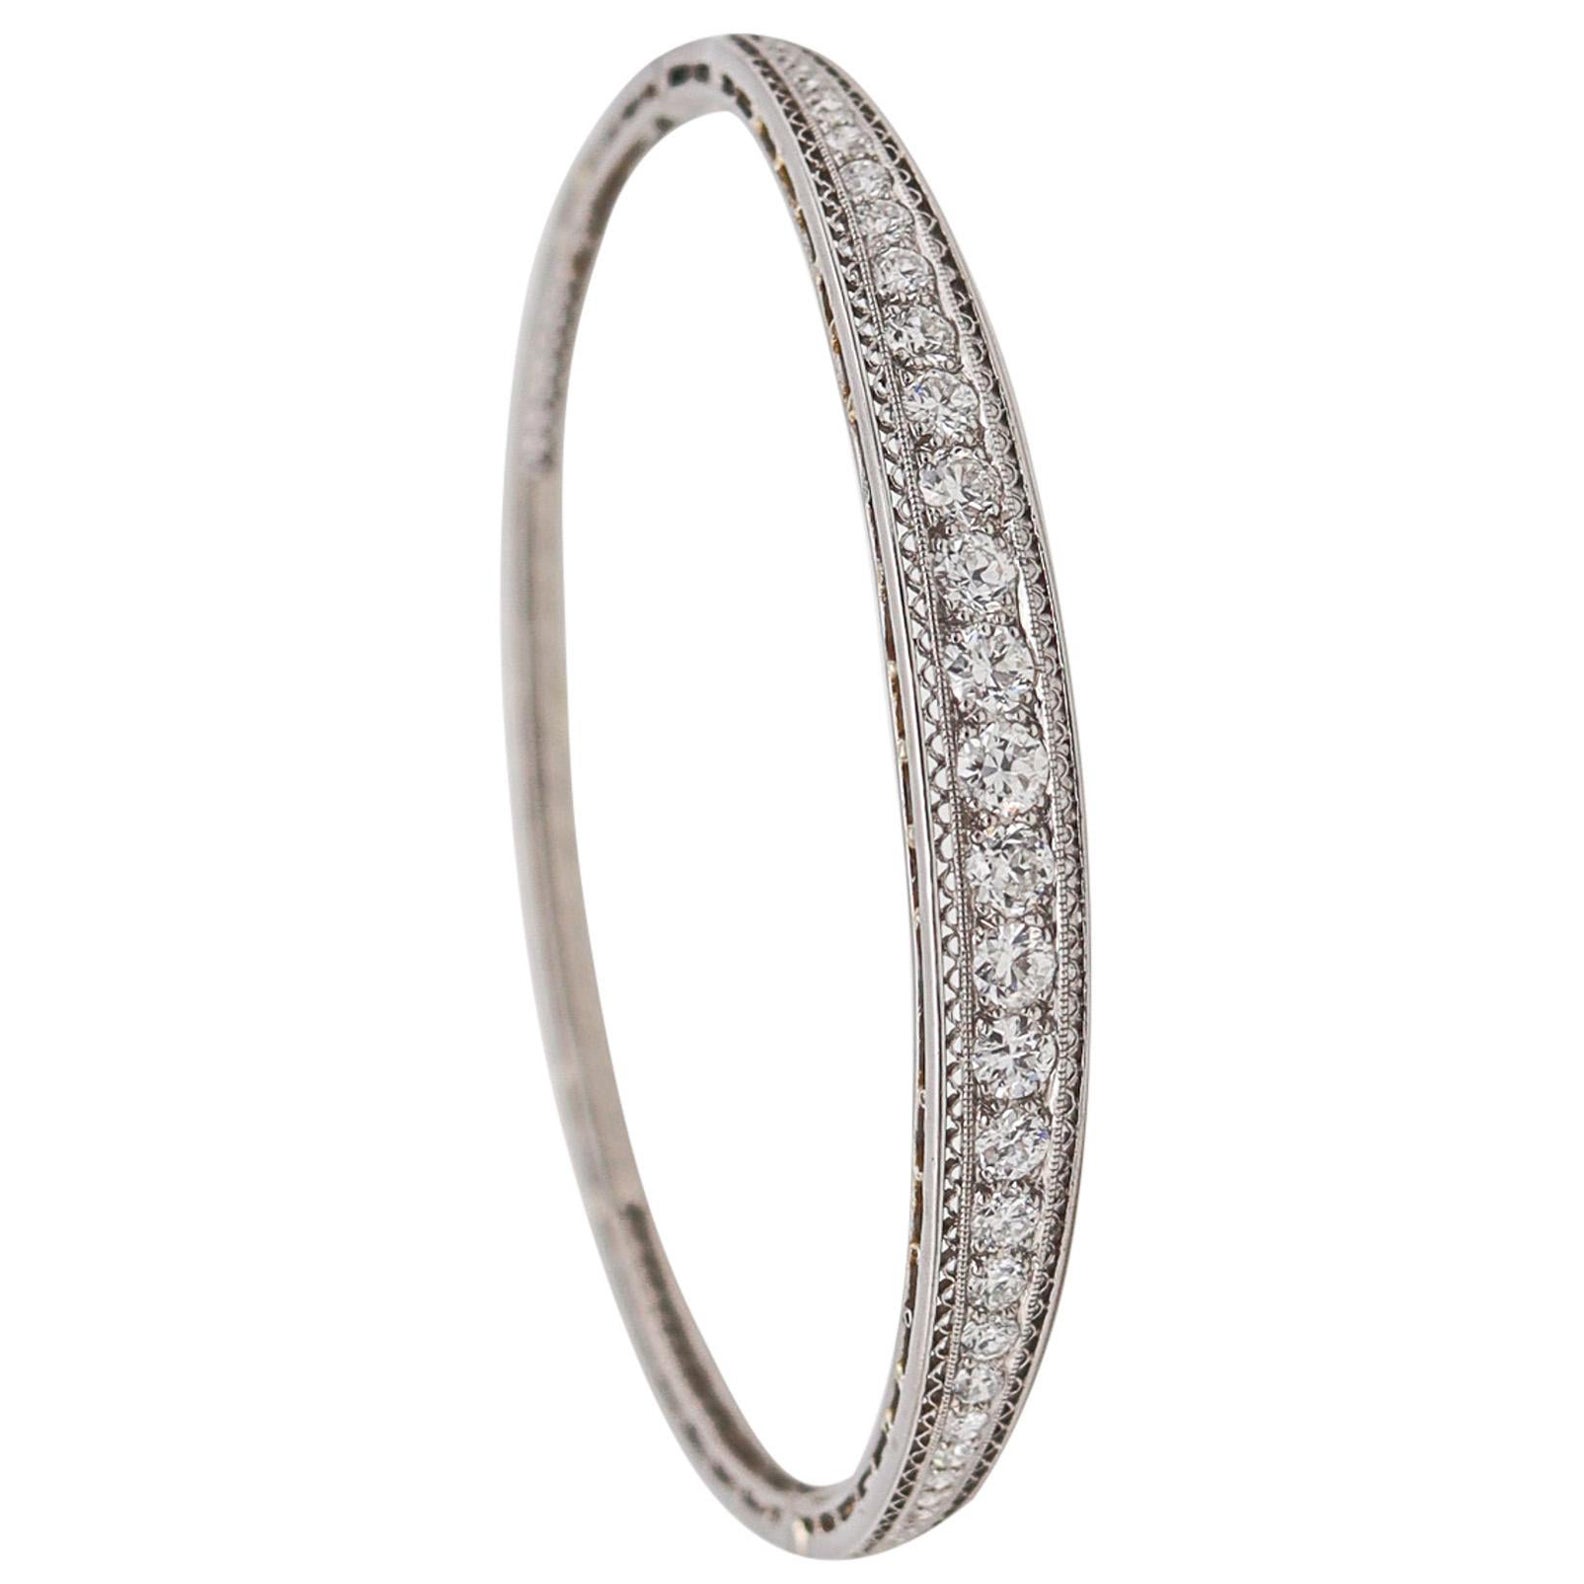 Marcus & Co. 1910 Edwardian Bangle Bracelet In Platinum With 3.16 Ctw In Diamond For Sale